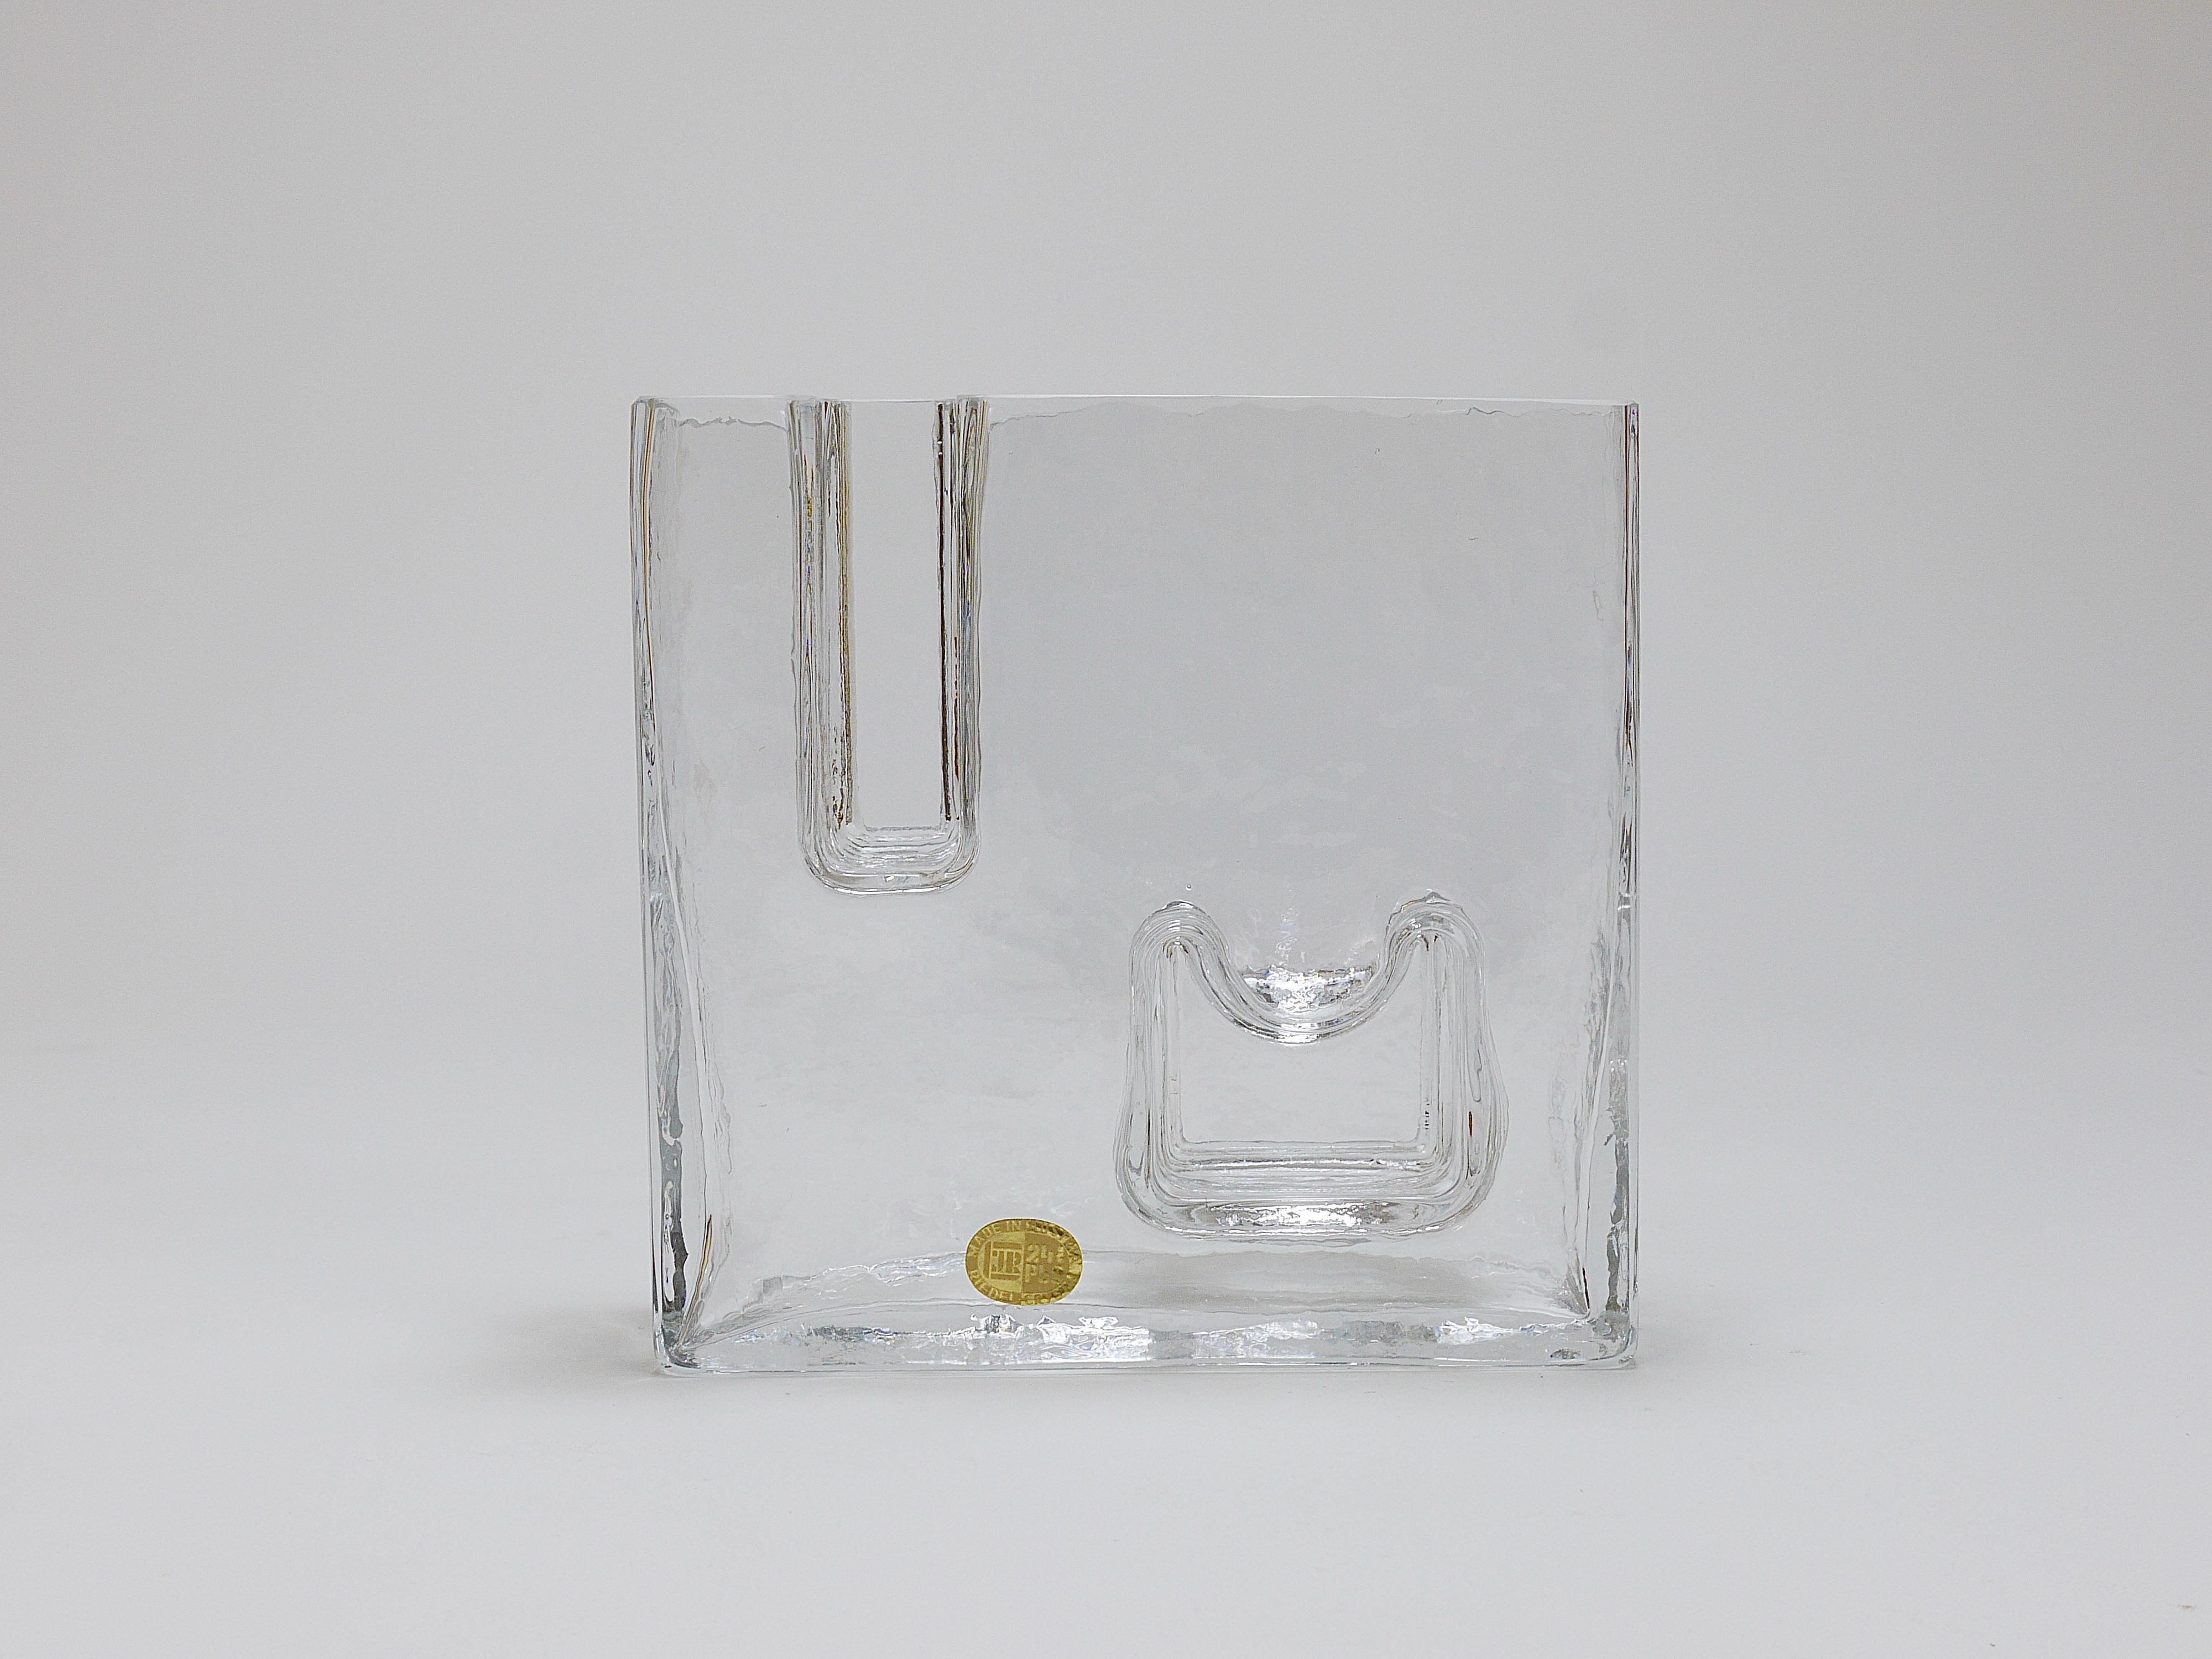 A wonderful Brutalism style geometric Op Art ice glass vase from the 1970s. Designed and executed by Claus Josef Riedel in Austria. Made of thick and solid „melting“ crystal glass. Labelled on its front and signed on its underneath, in excellent